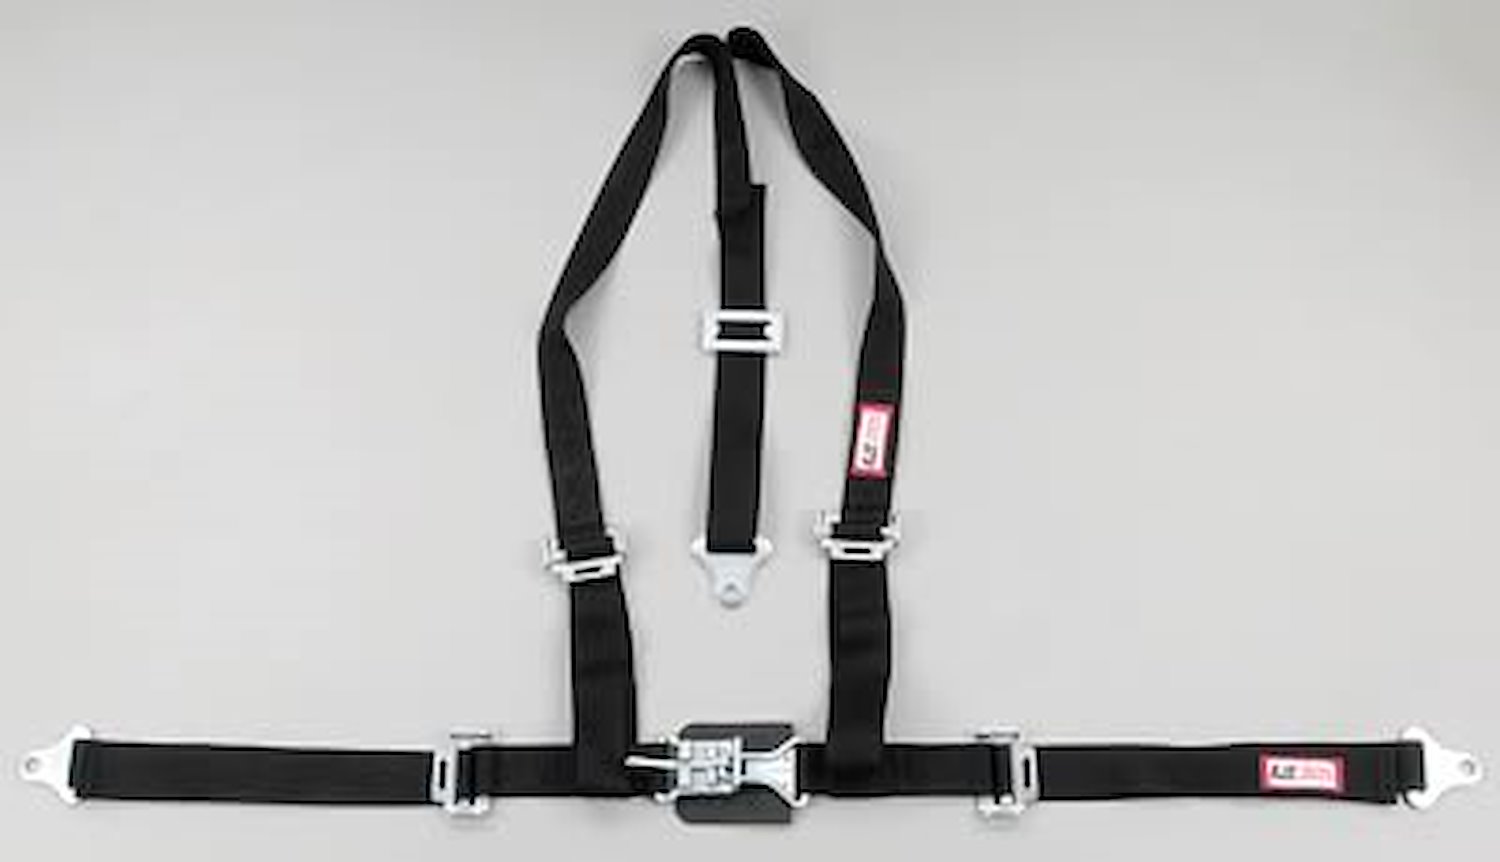 NON-SFI L&L HARNESS 2 PULL DOWN Lap Belt SEWN IN 2 S.H. Y FLOOR Mount w/STERNUM STRAP ALL WRAP ENDS KHAKI